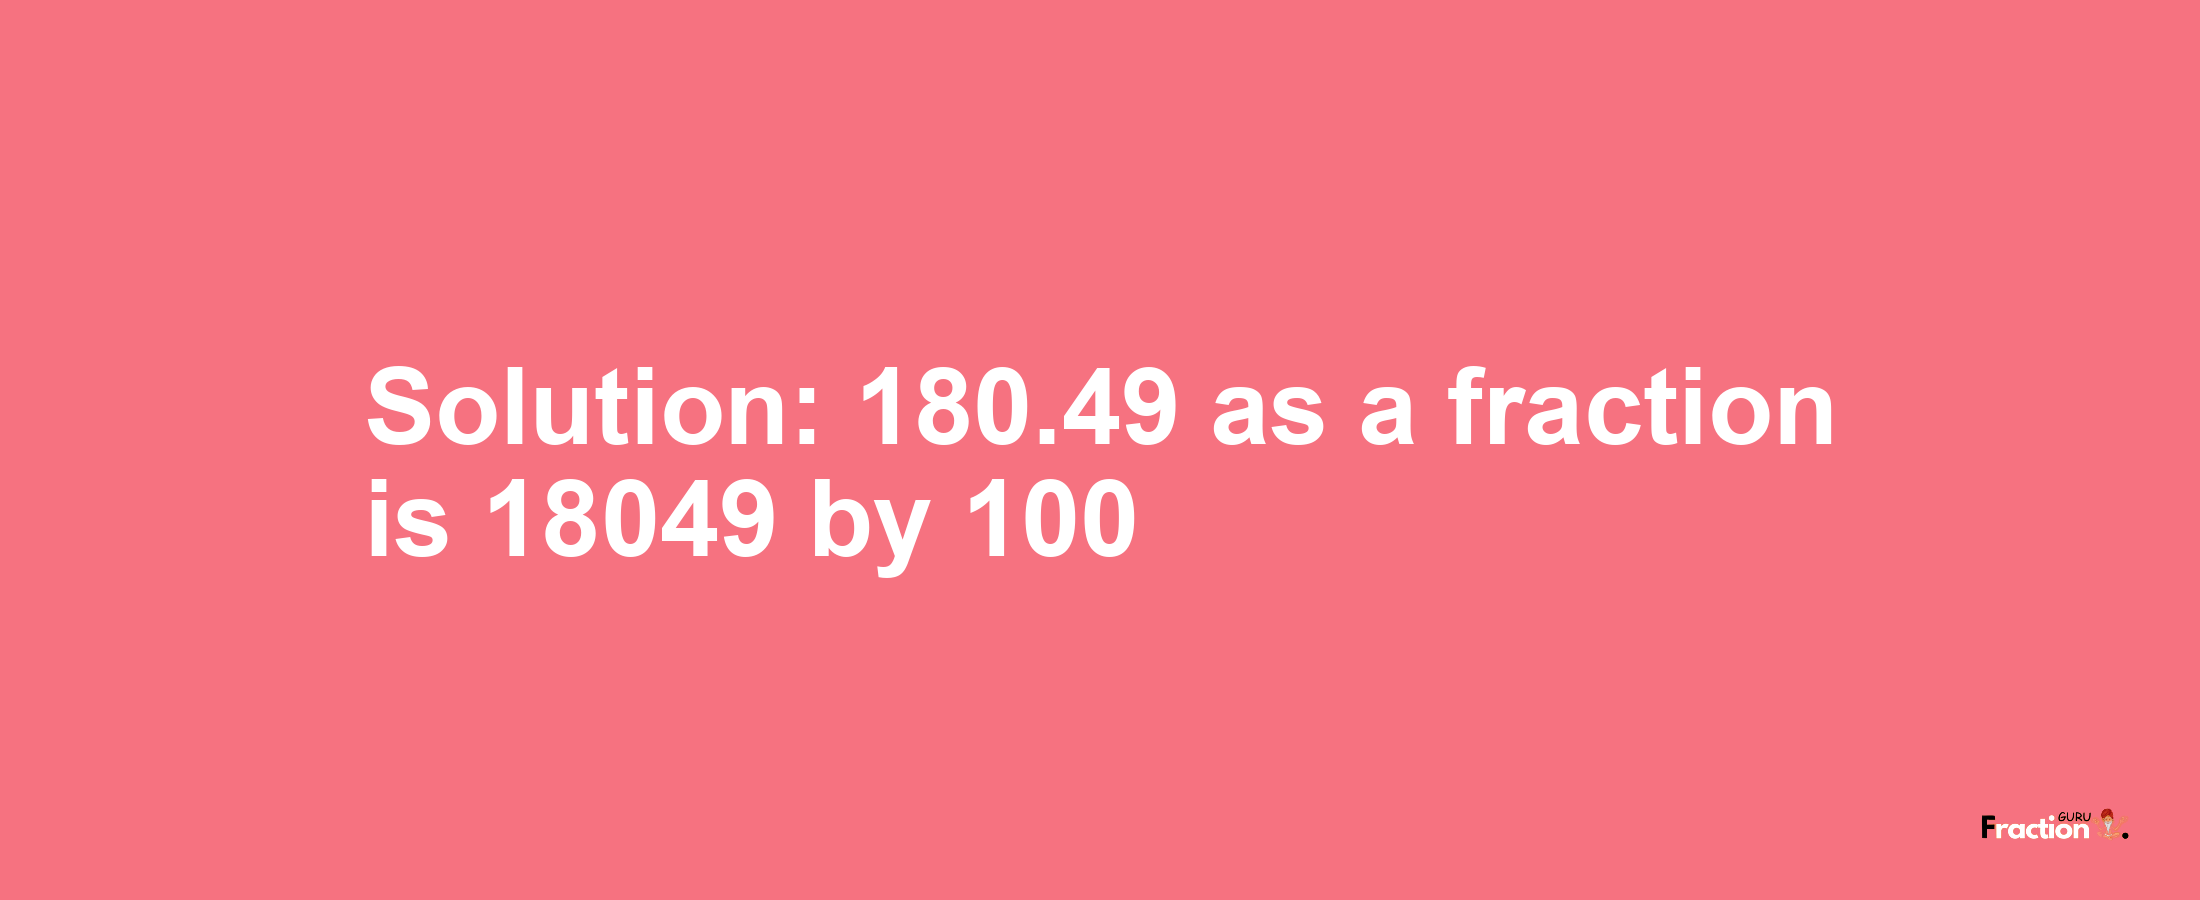 Solution:180.49 as a fraction is 18049/100